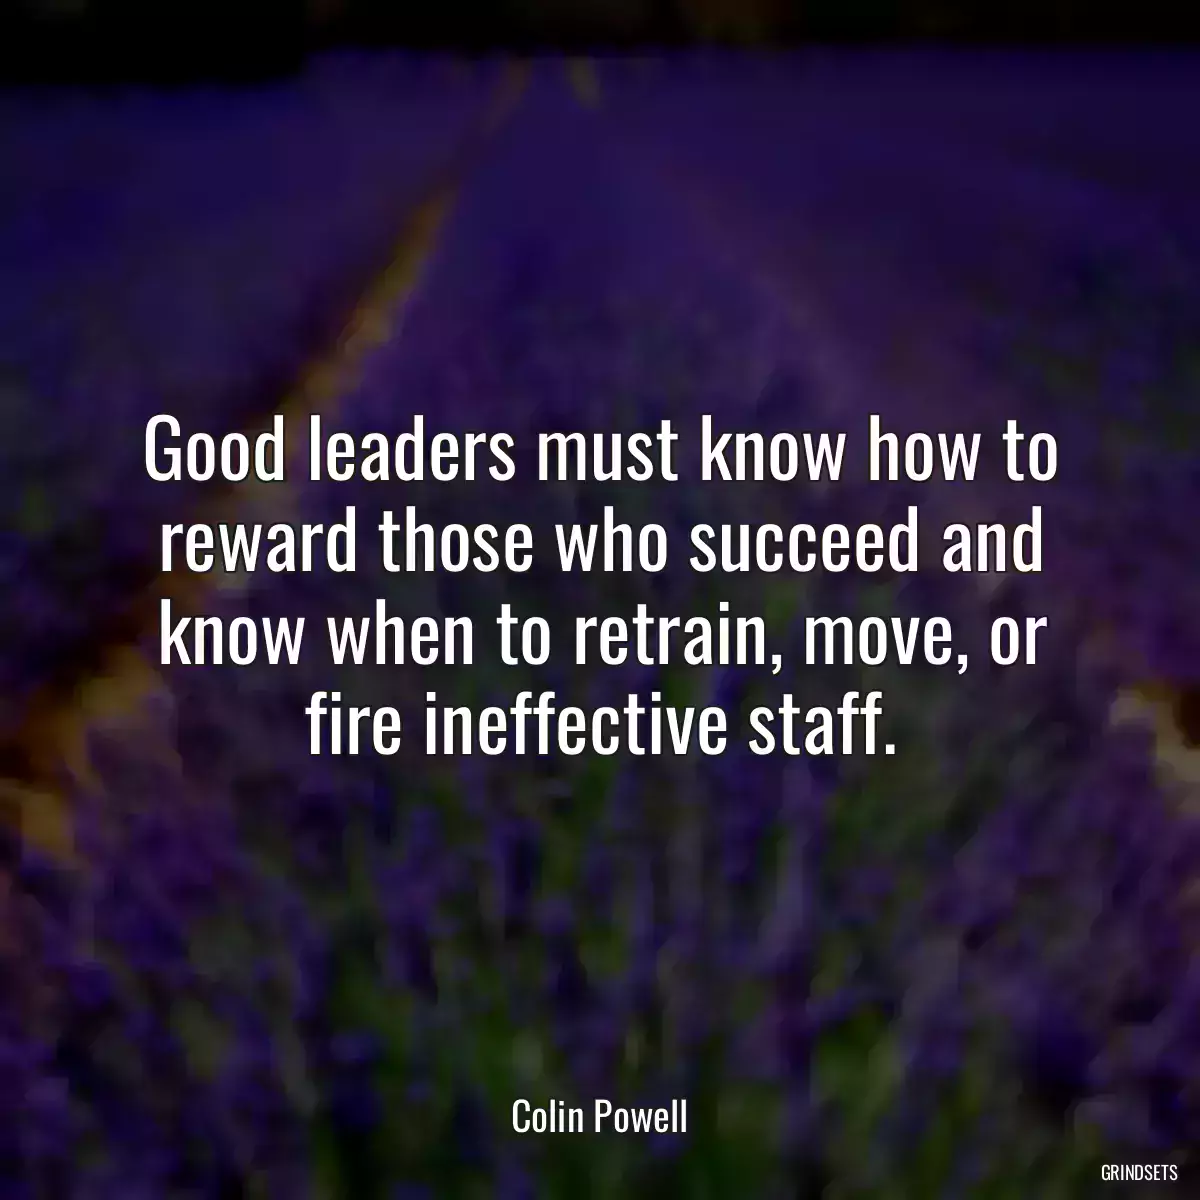 Good leaders must know how to reward those who succeed and know when to retrain, move, or fire ineffective staff.